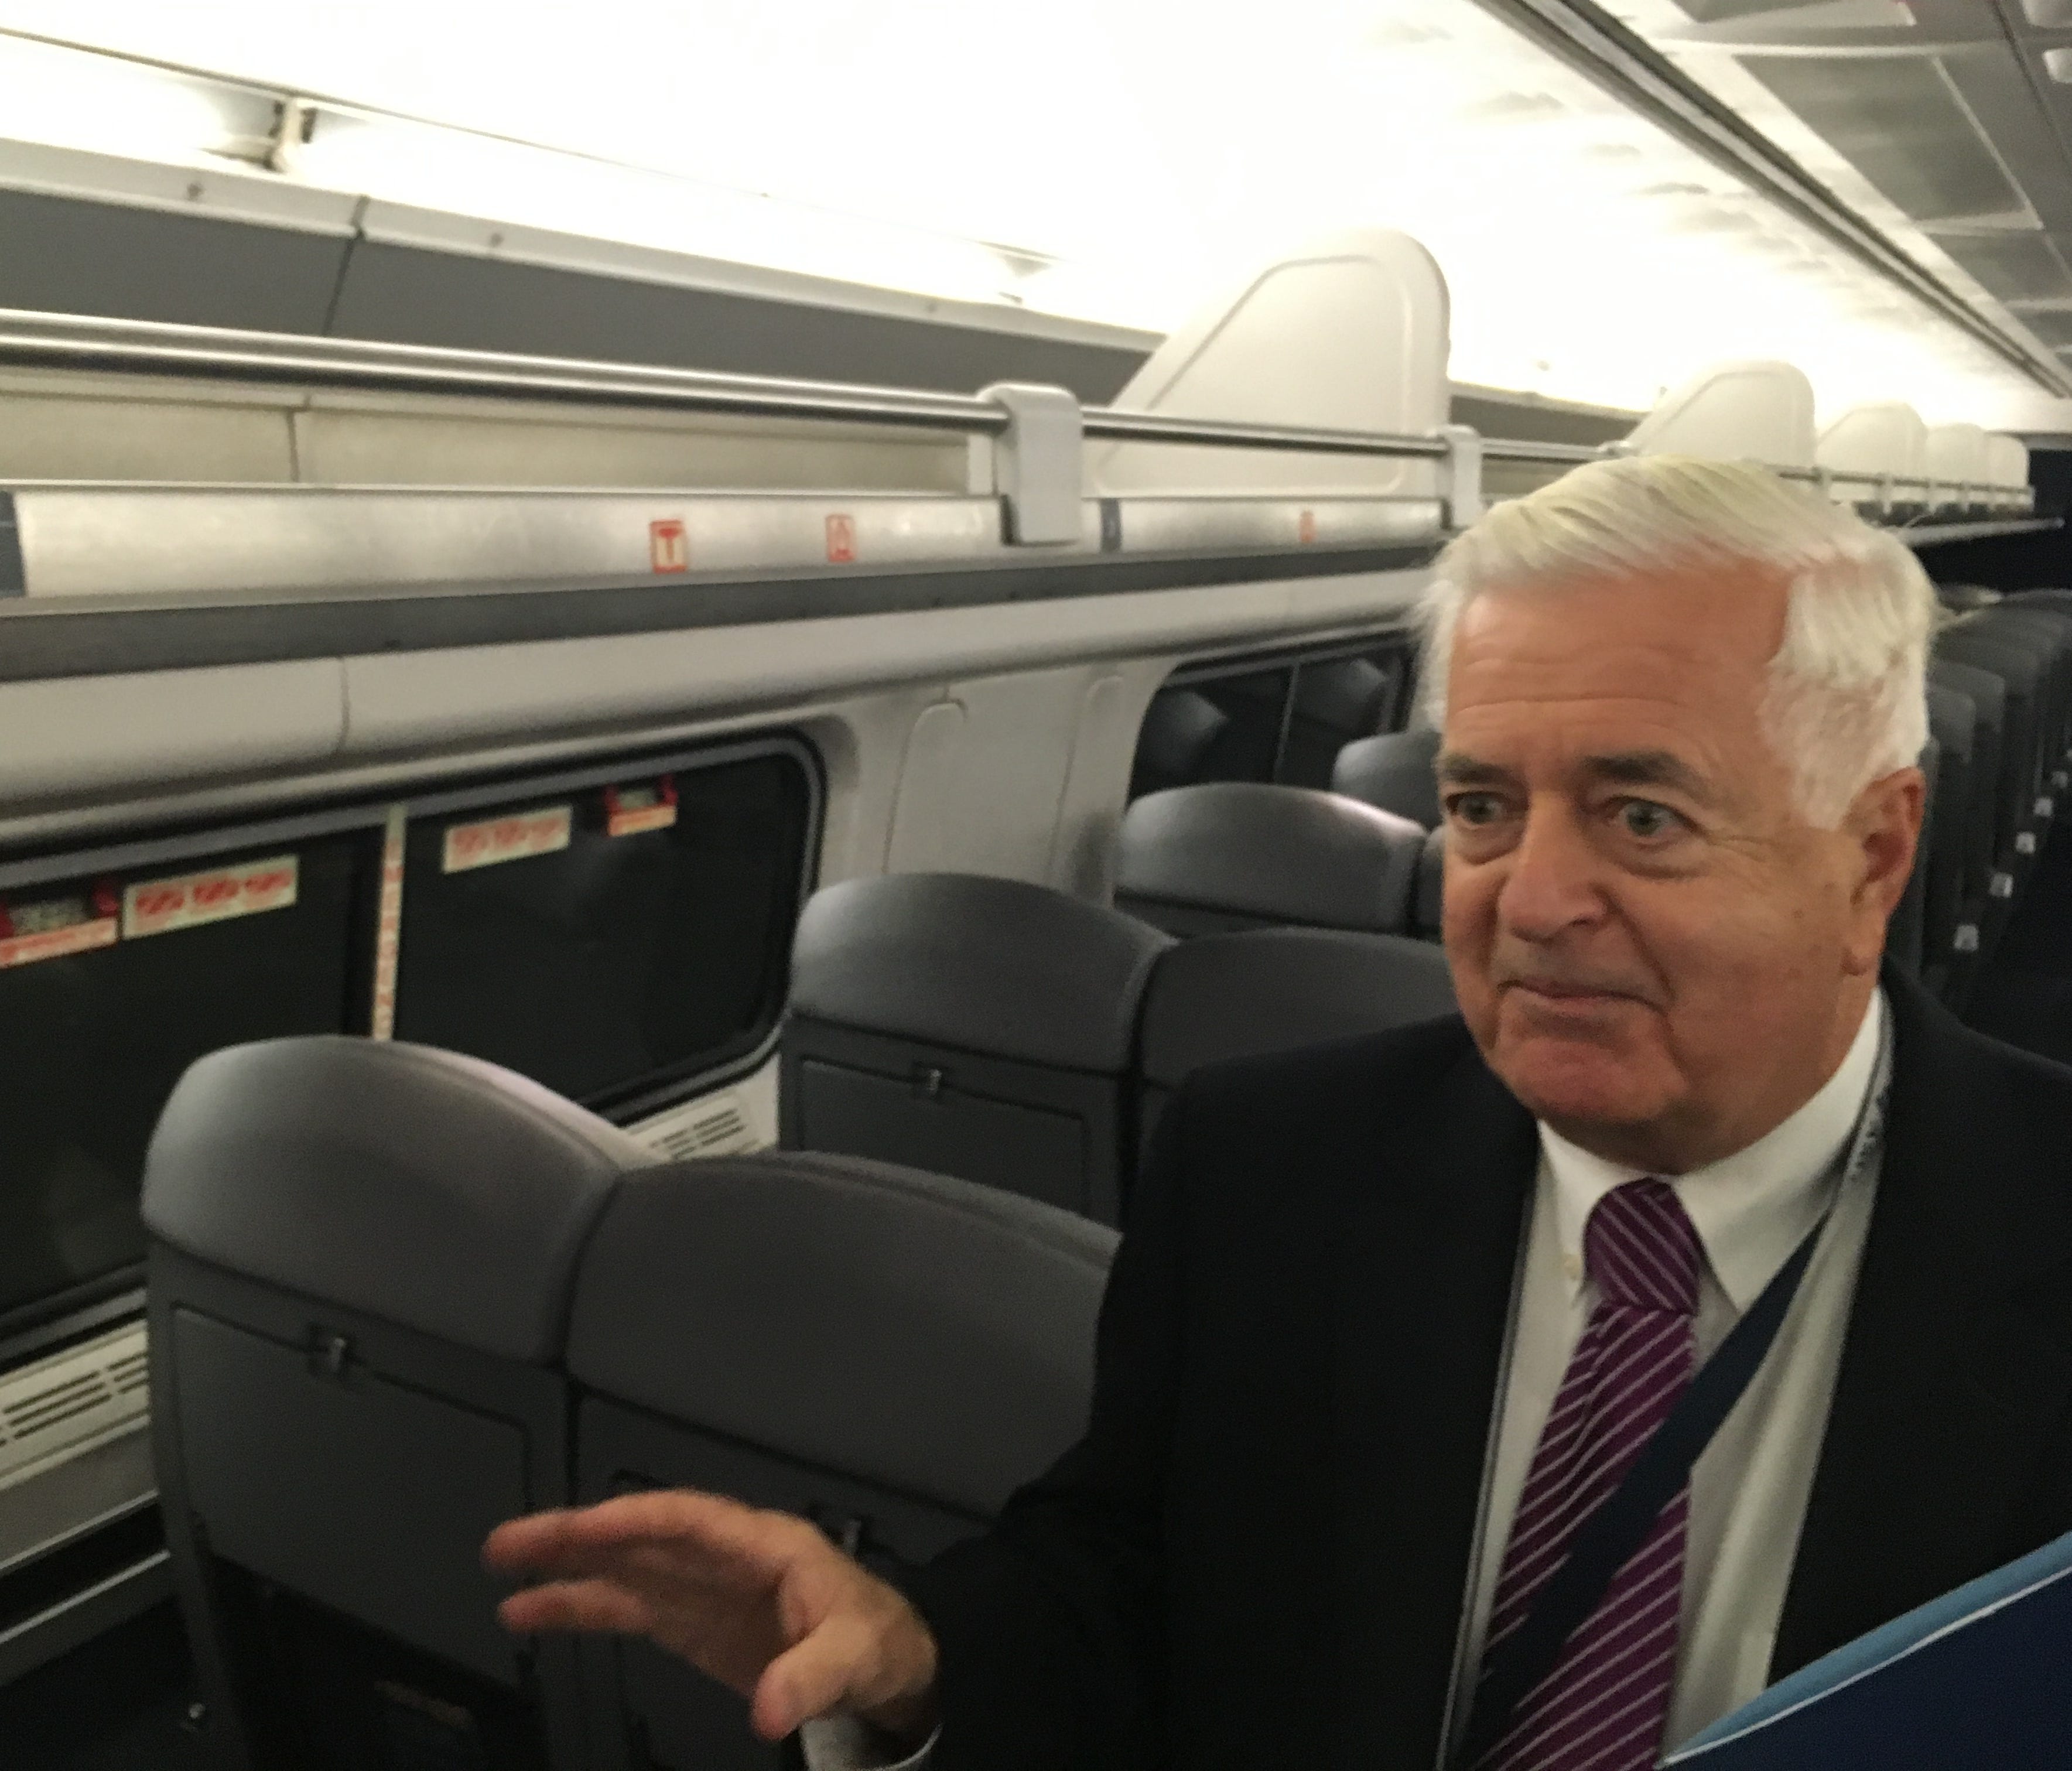 Mark Yachmetz, Amtrak's vice president for Northeast Corridor business development, describes renovations being phased in on 450 train cars at Washington's Union Station on Nov. 13, 2017. The upgrades include new carpeting, simulated-leather seat cus